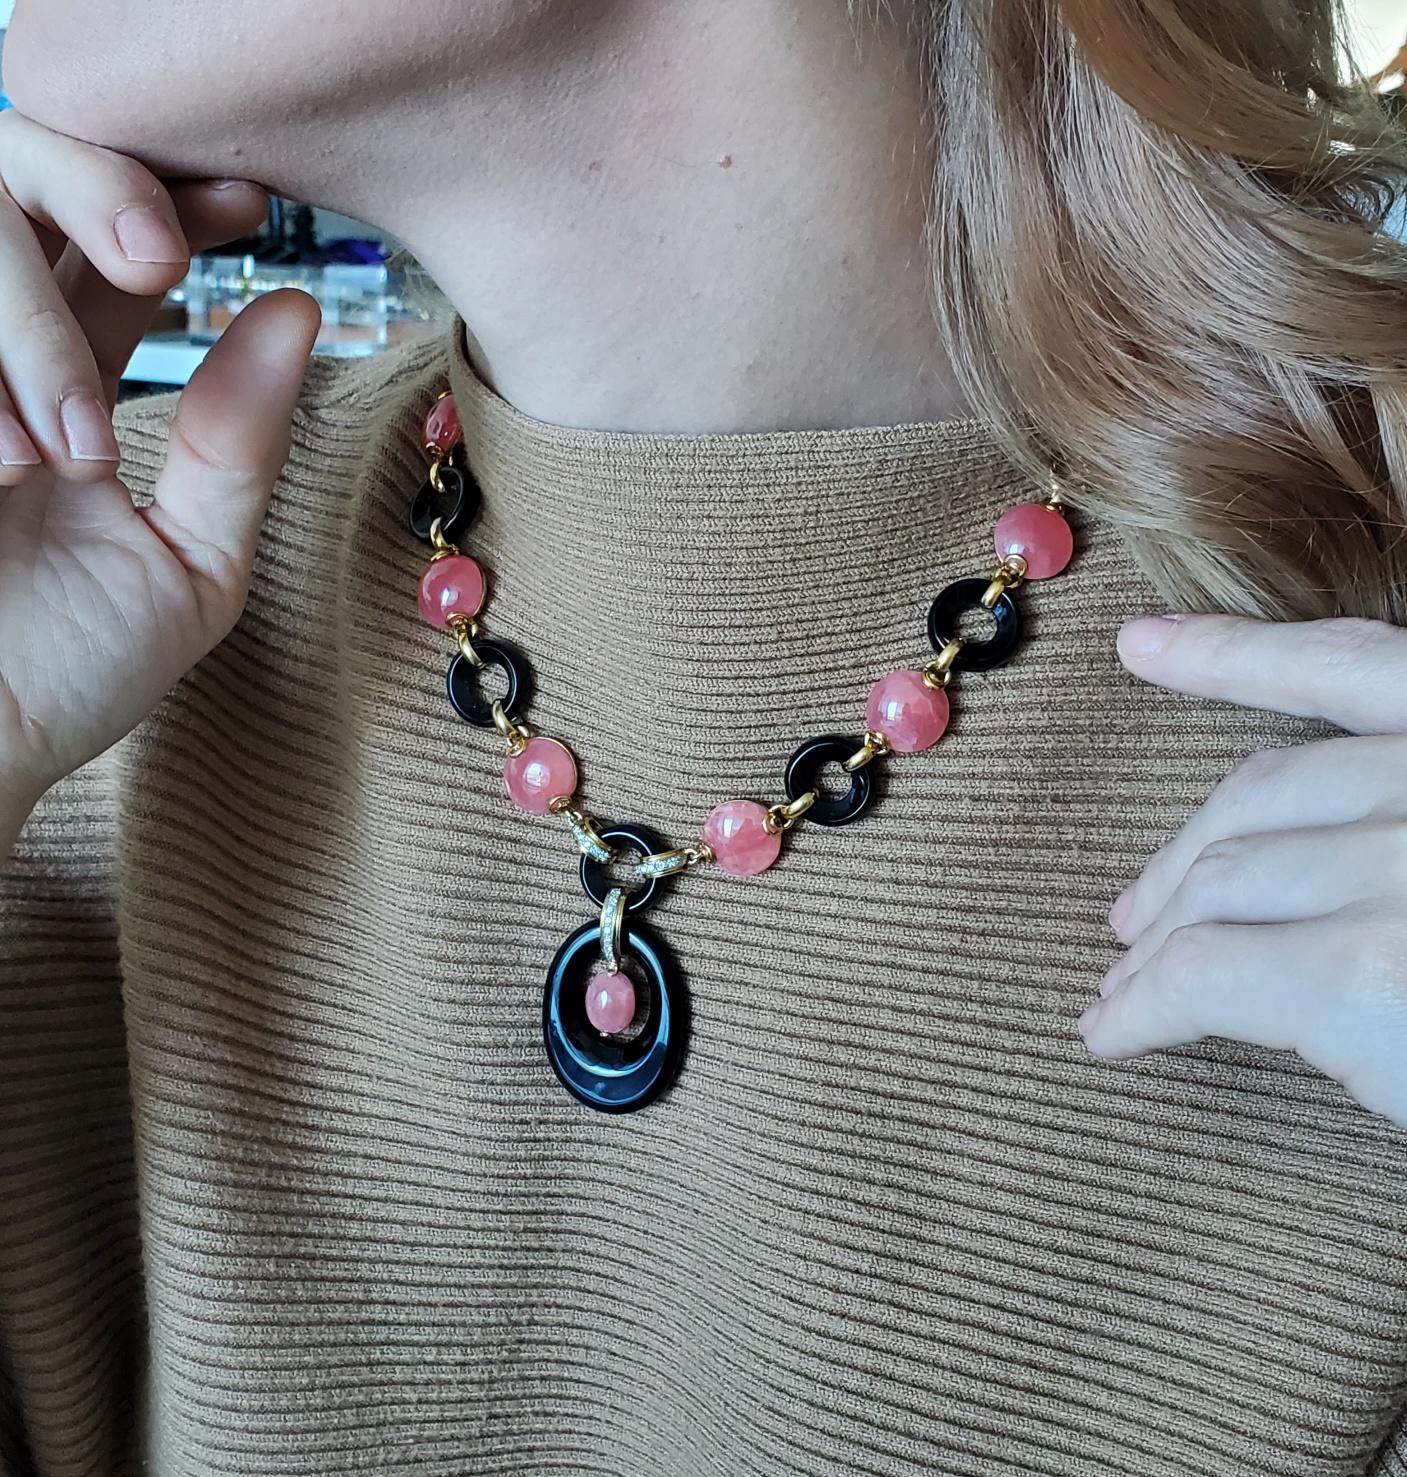 Retro modernism necklace with Rhodochrosite.

Wonderful retro-modernist necklace, created around the 1970's in the northern region of Europe, most probably in Germany or the Netherlands. This colorful and elegant piece has been crafted in solid